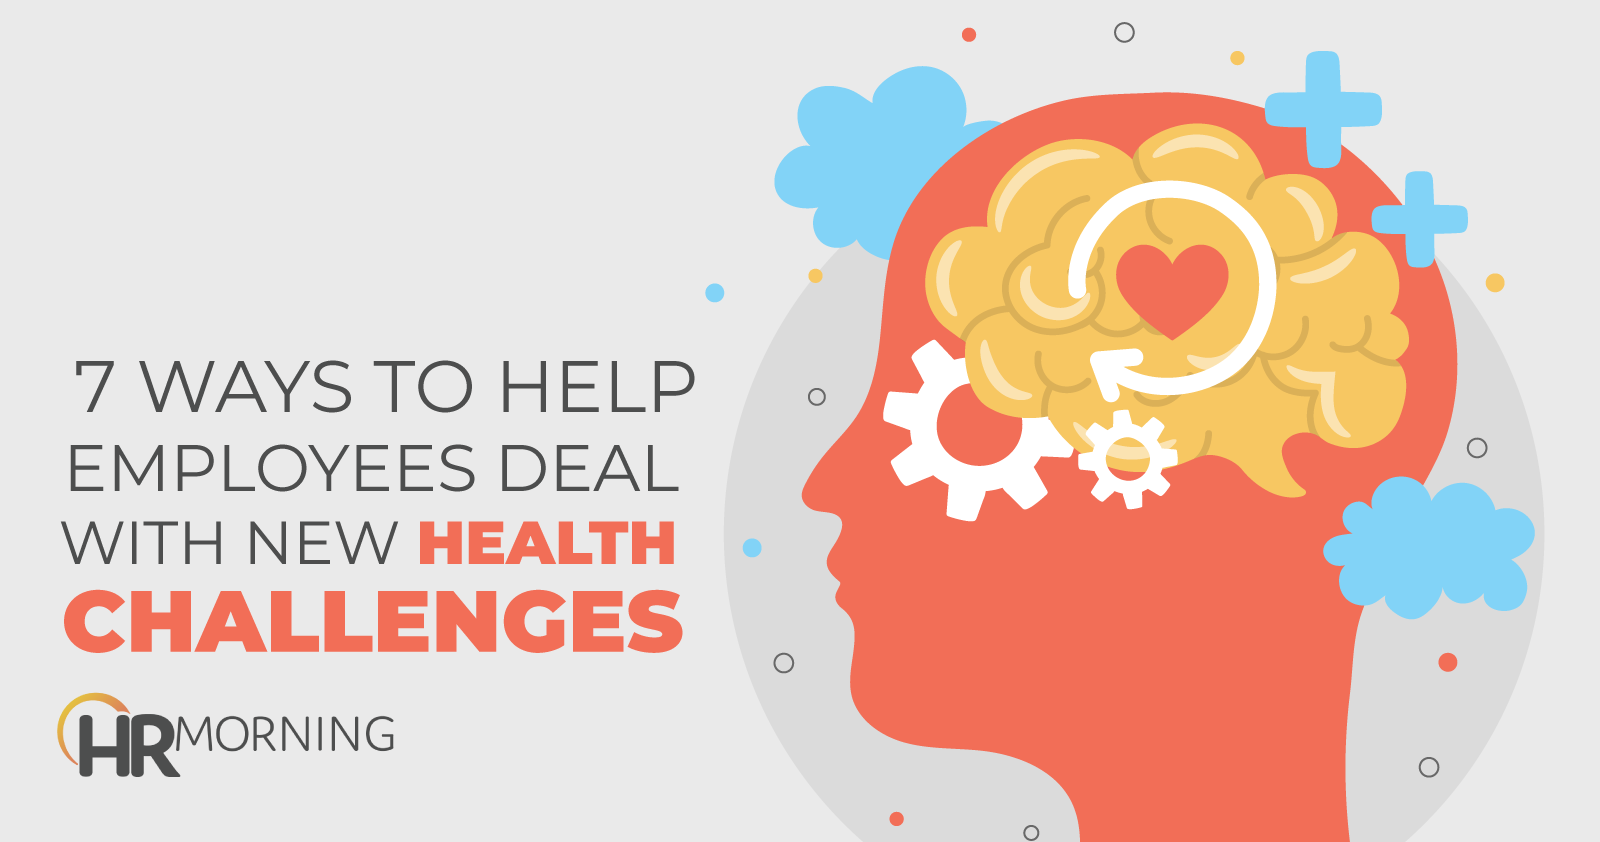 7 Ways To Help Employees Deal With New Health Challenges